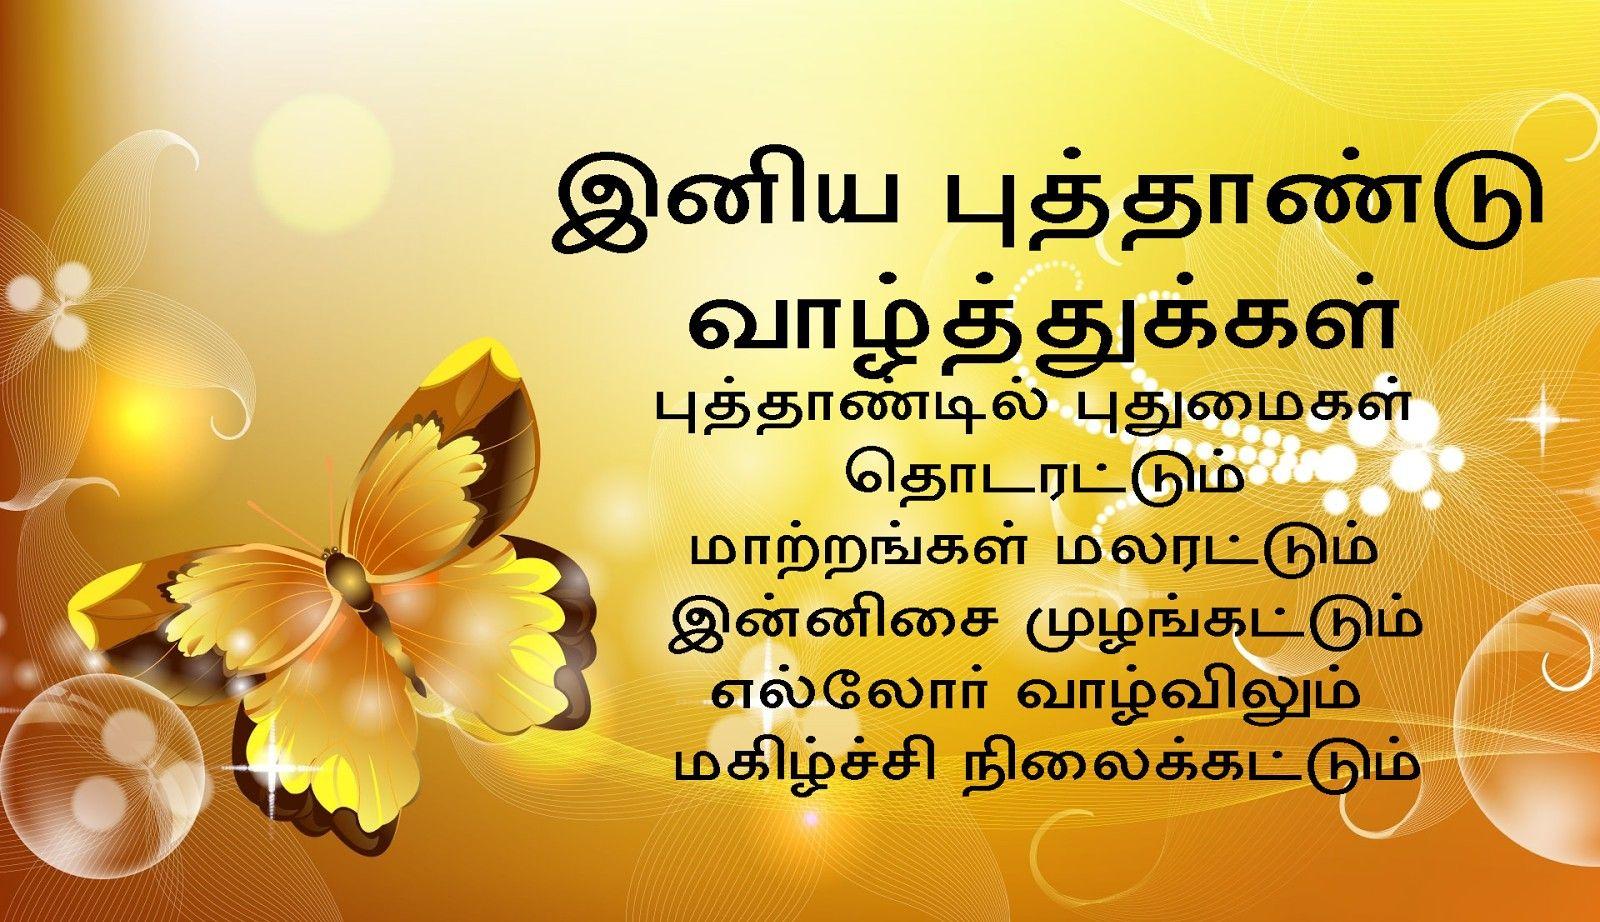 Featured image of post Tamil Love Kavithai Wallpapers Download Tamil love kavithaigal about girls love anbu kavithai images download free kadhal kavithaigal vazhkai kavithaigal life kavithai in tamil send these through sms